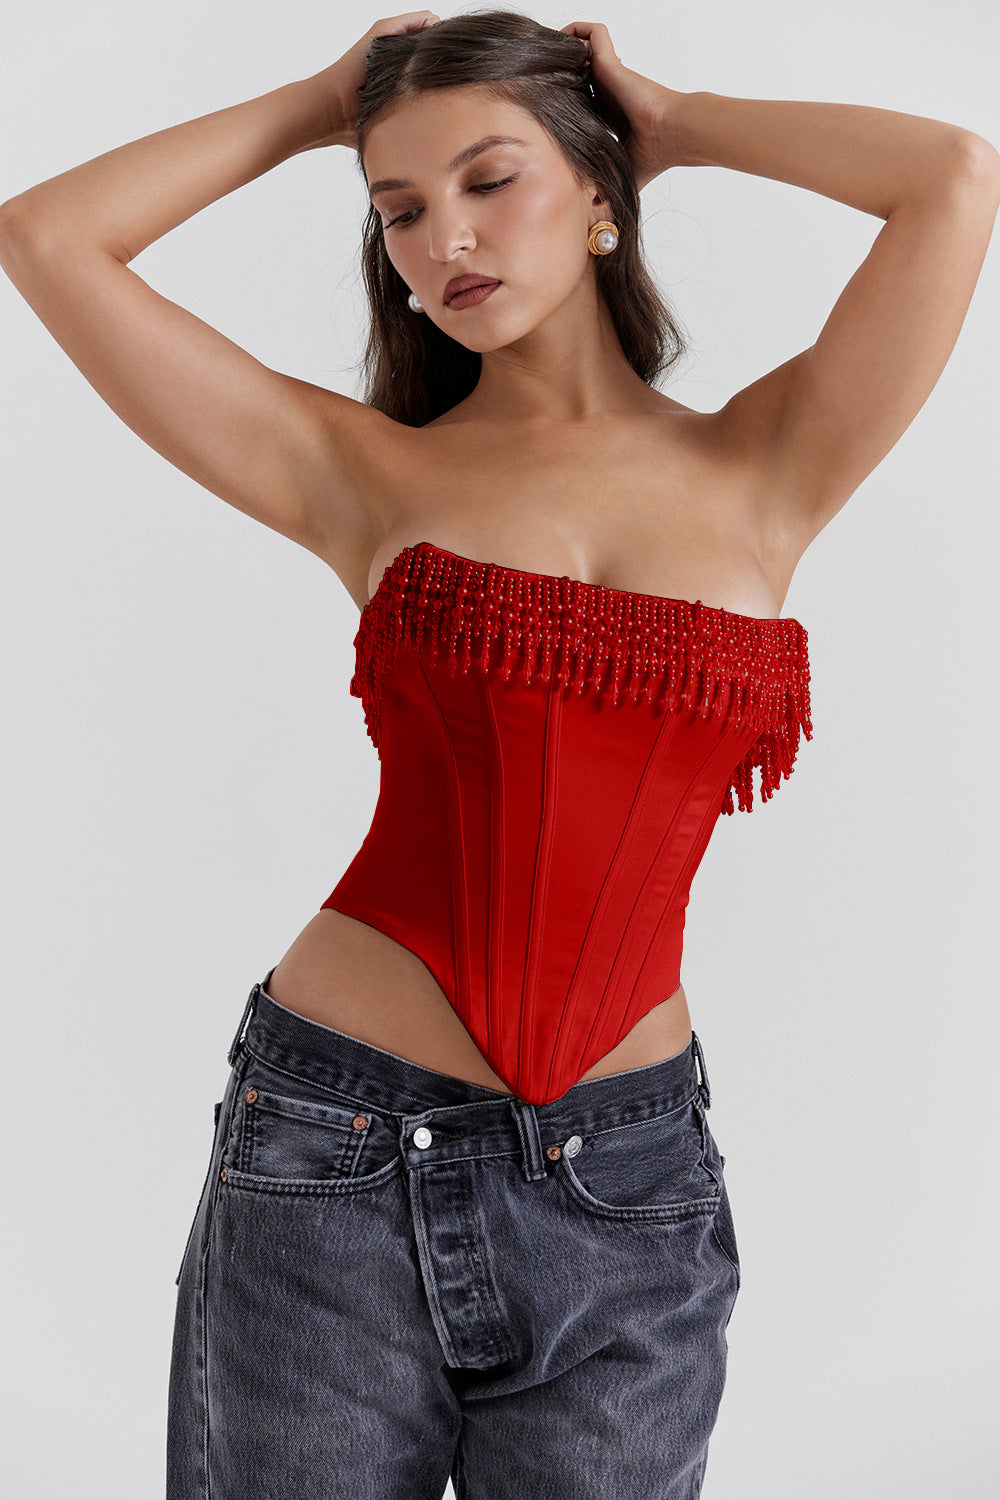 Solid Color Sexy Pearl Tube Top Sleeveless Fishbone Vest